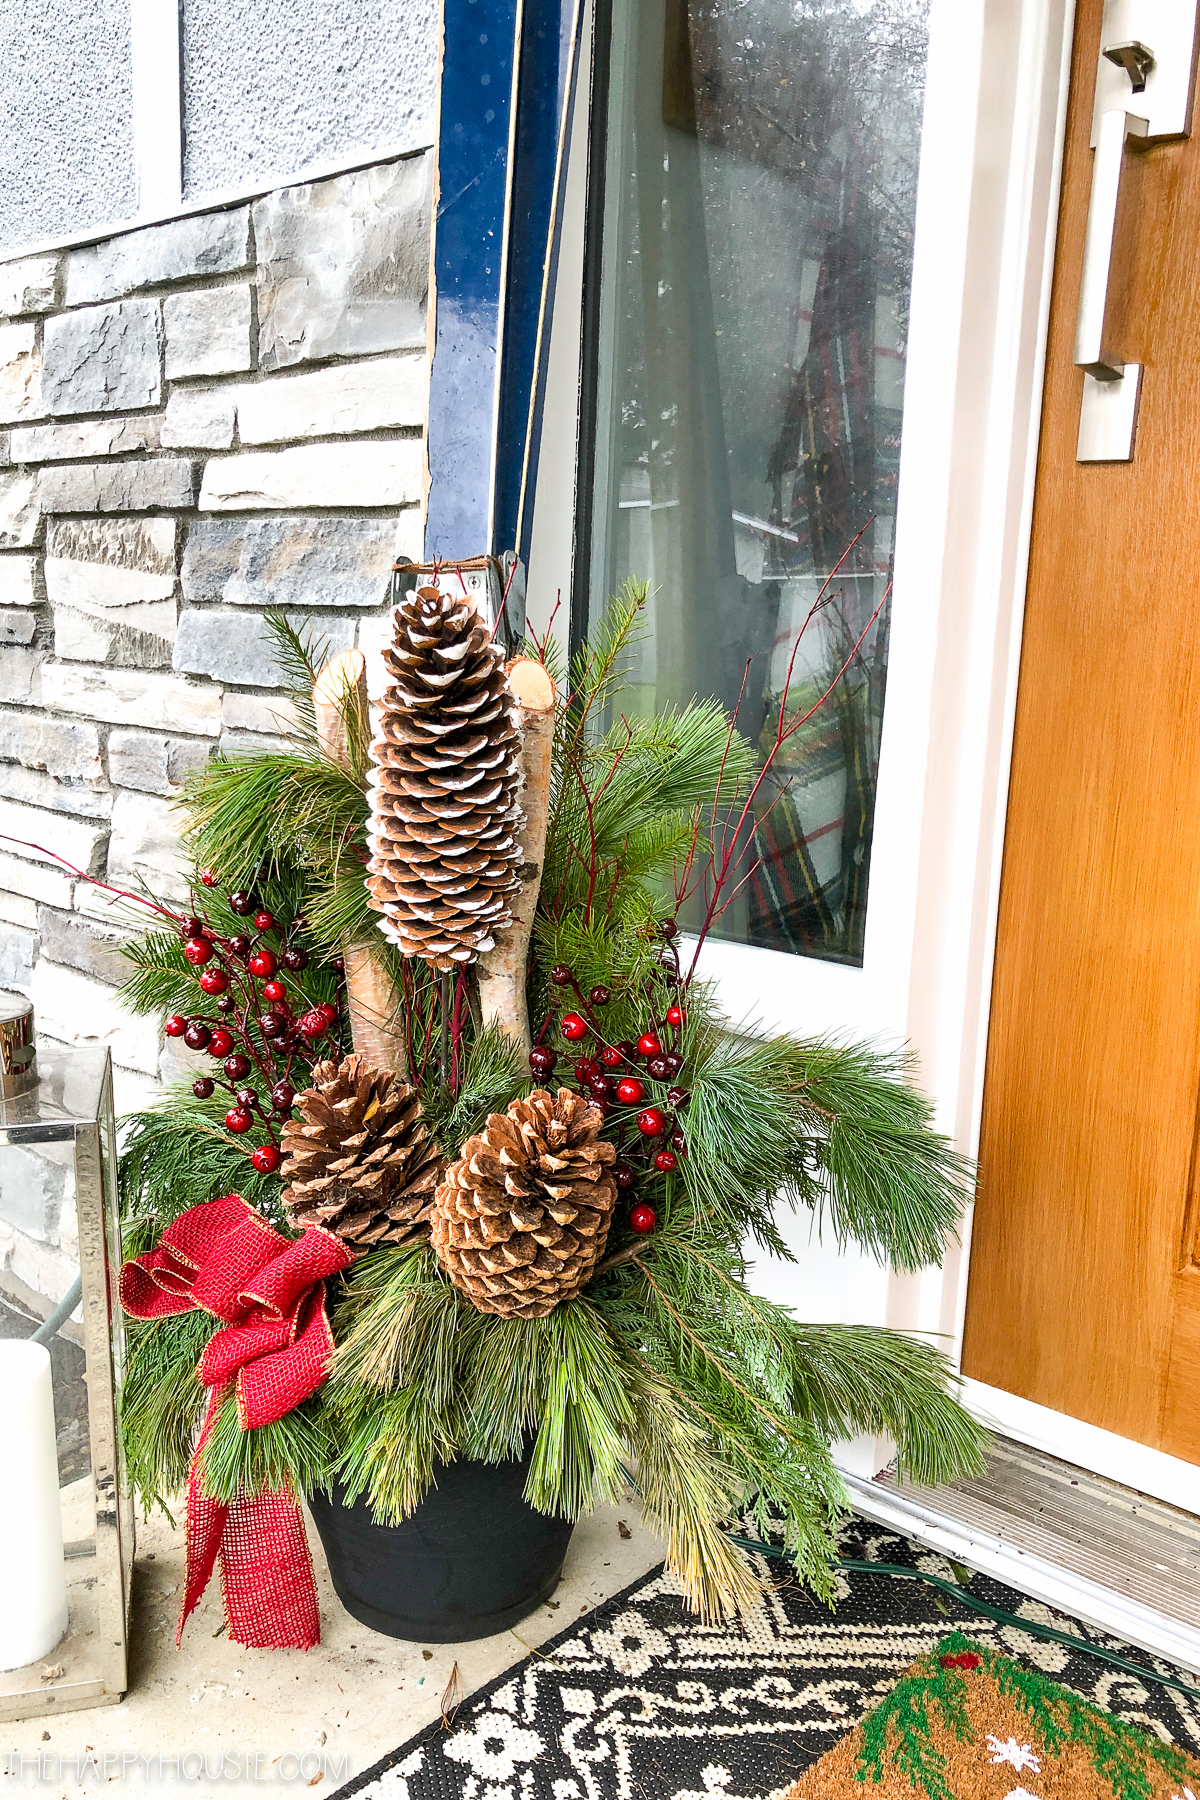 A planter filled with pine cones and greenery with a red ribbon.